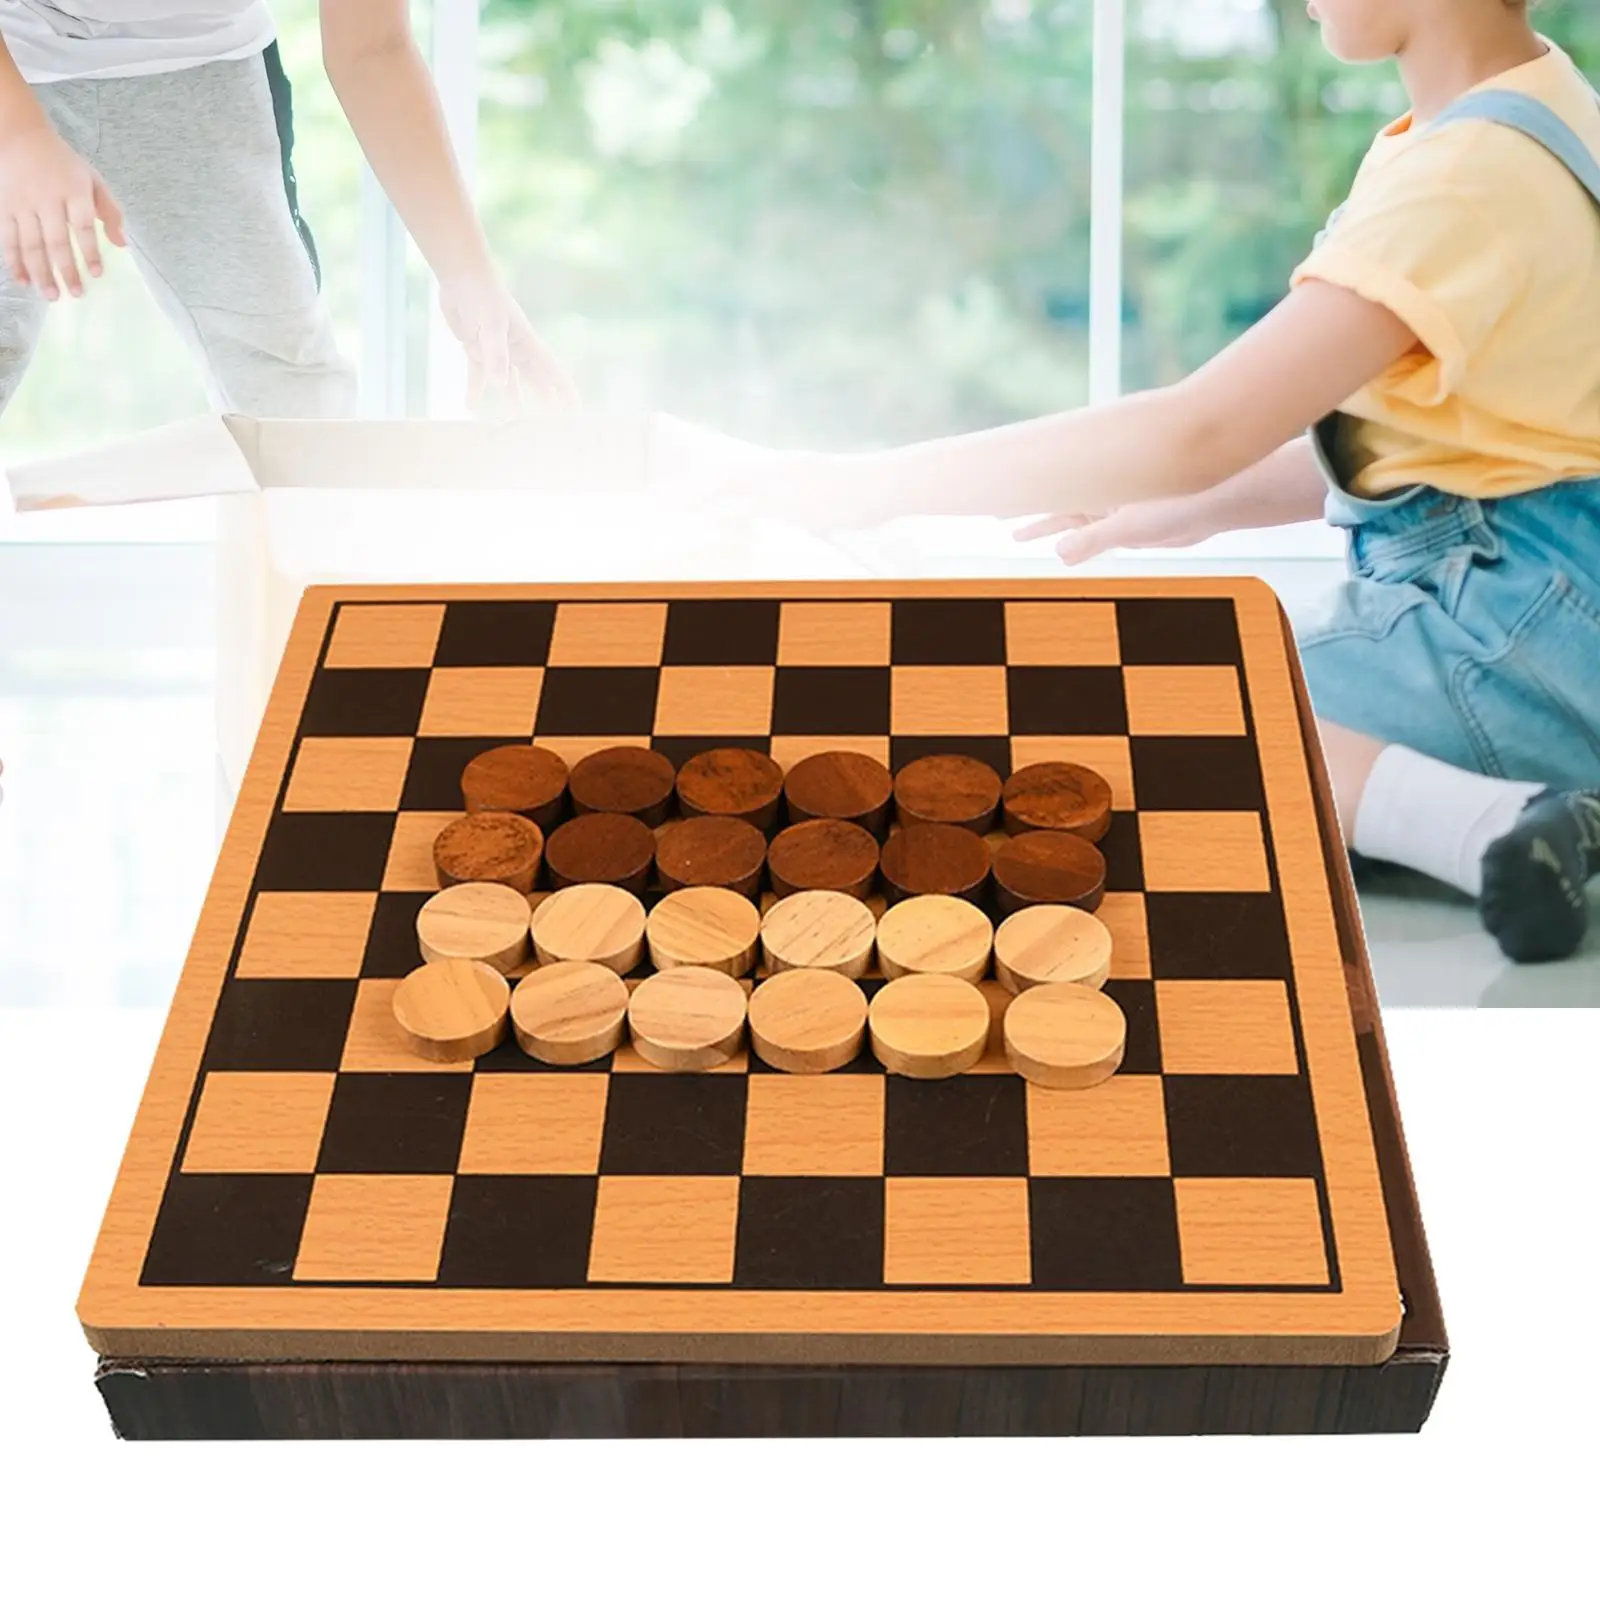 Chess Game Set Chess Board Entertainment Desktop Retro Style Gifts for Kids